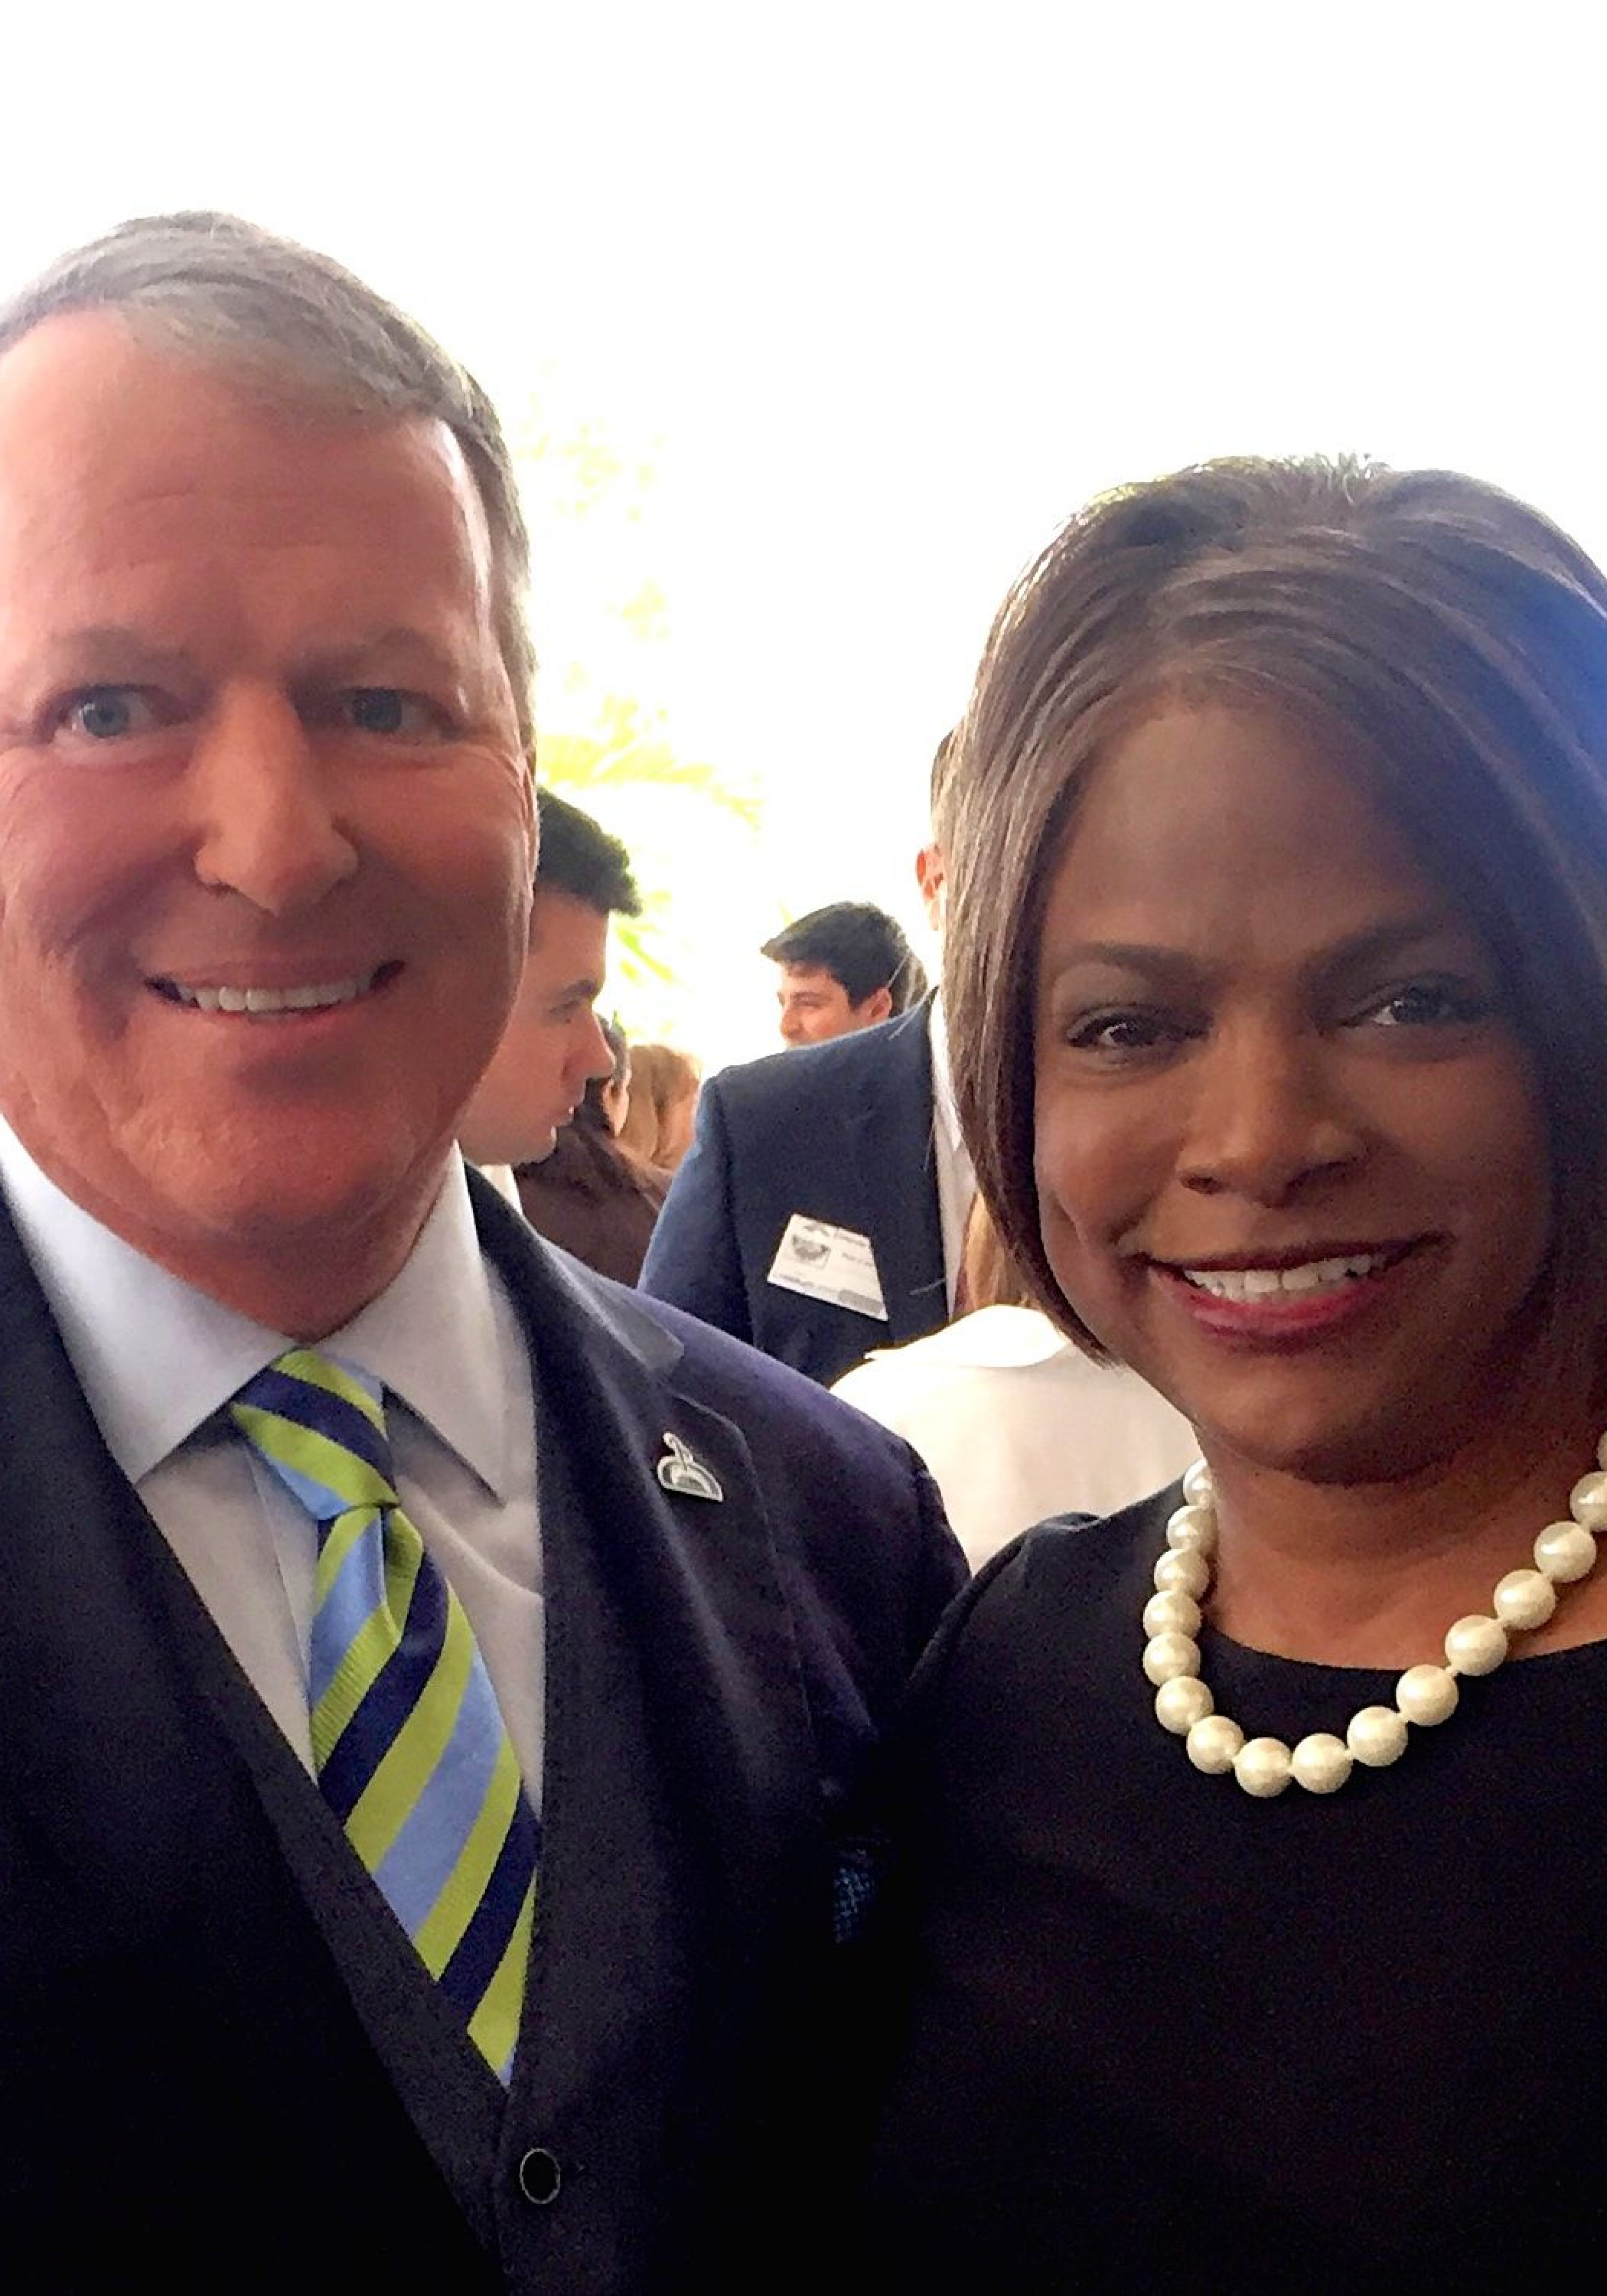 Buddy Dyer and Val Demings